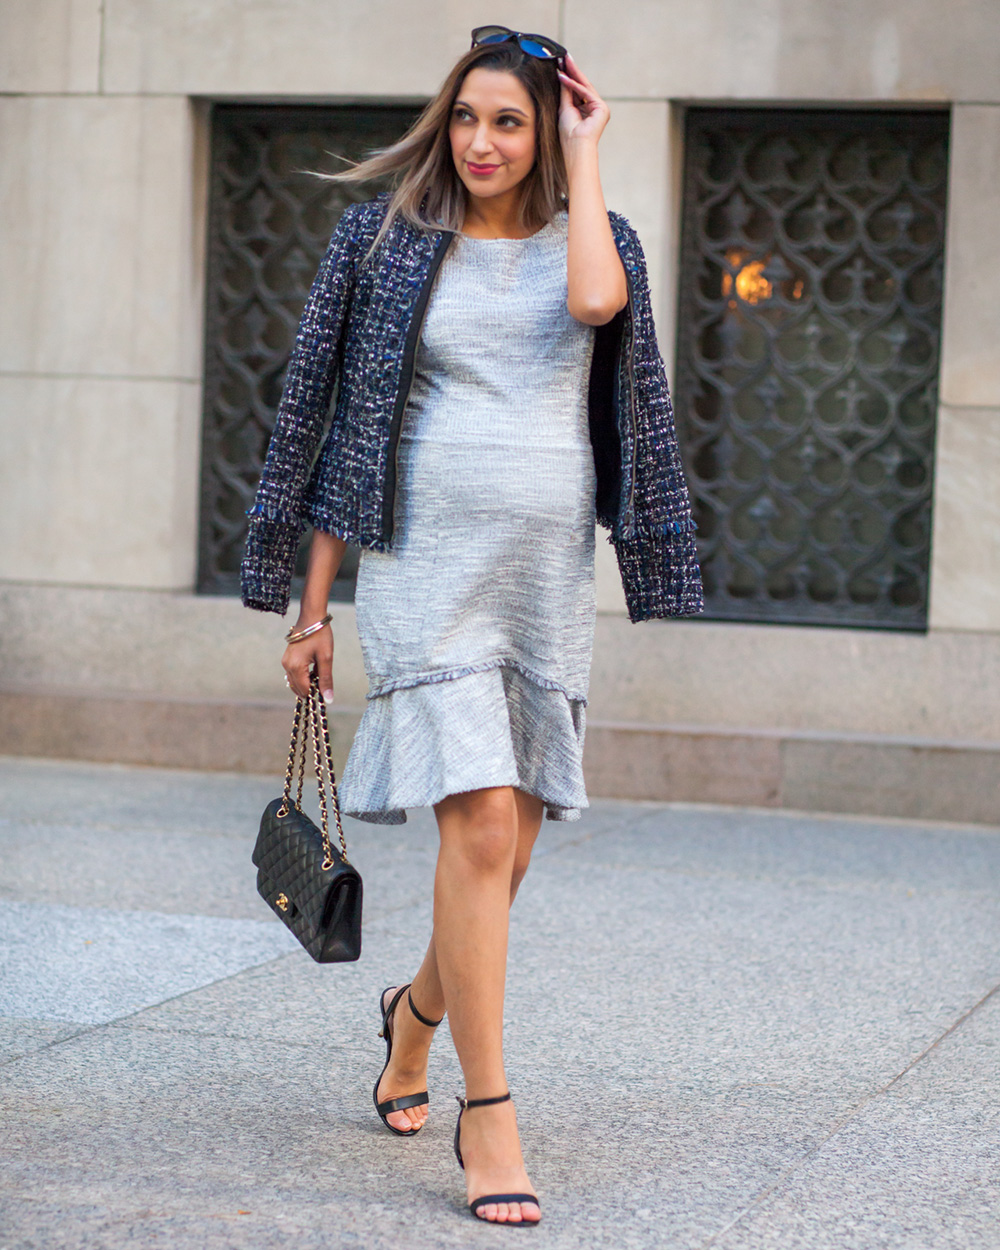 Banana Republic, Tweed, Style the Bump, How to look chic when pregnant